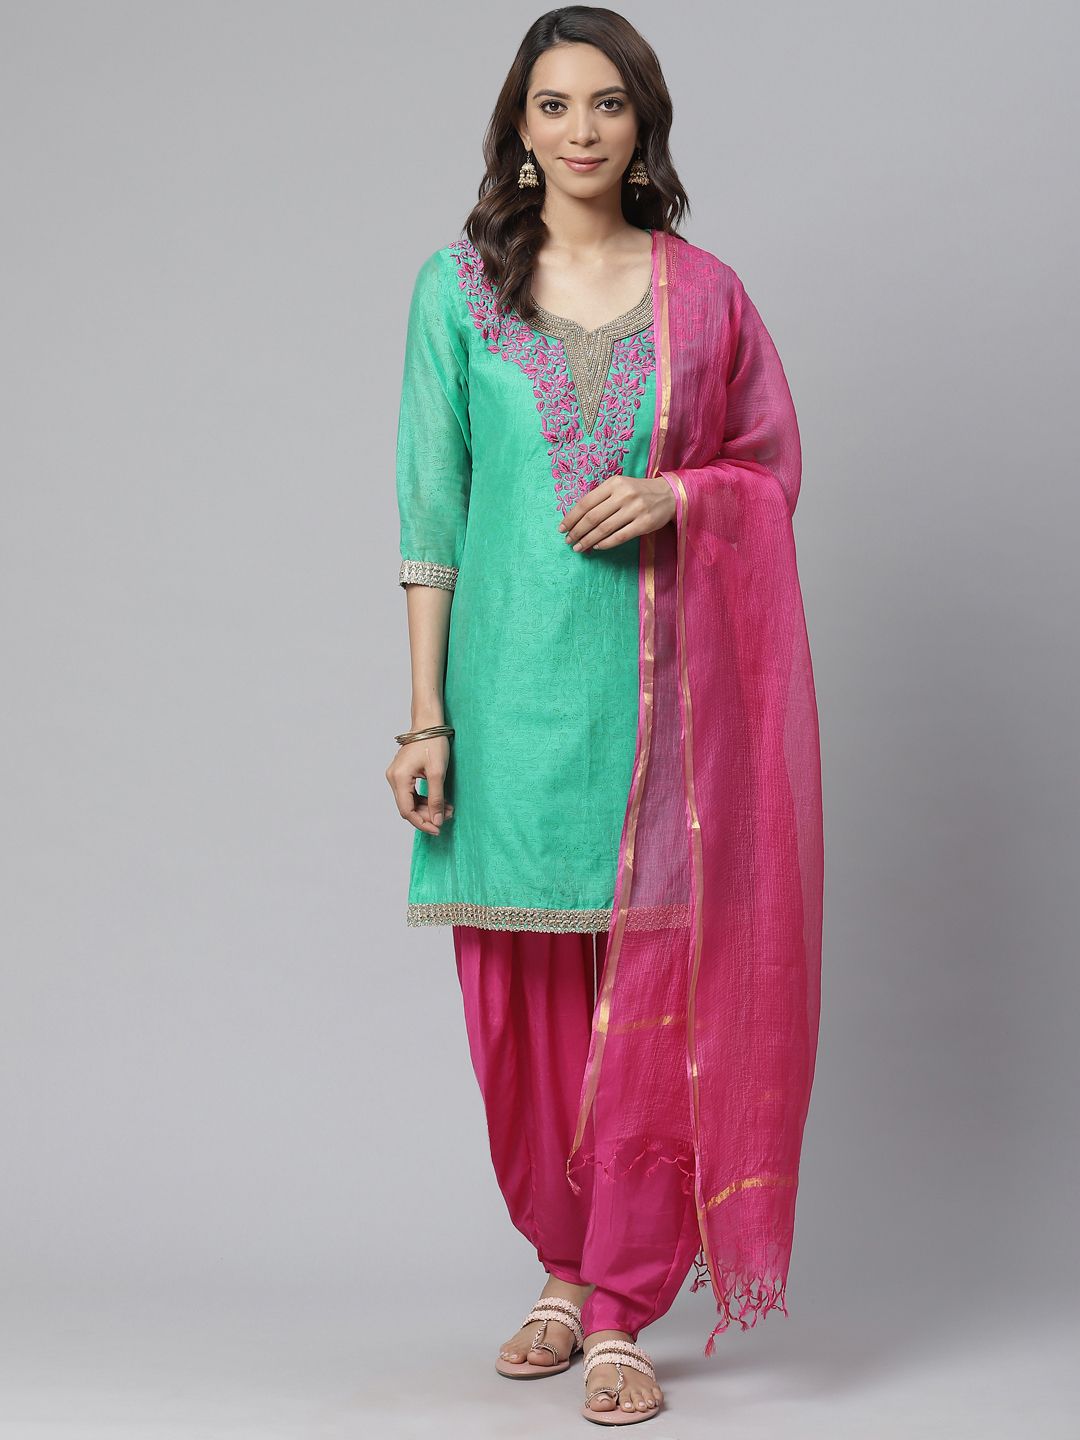 Readiprint Fashions Green & Pink Printed Unstitched Dress Material Price in India